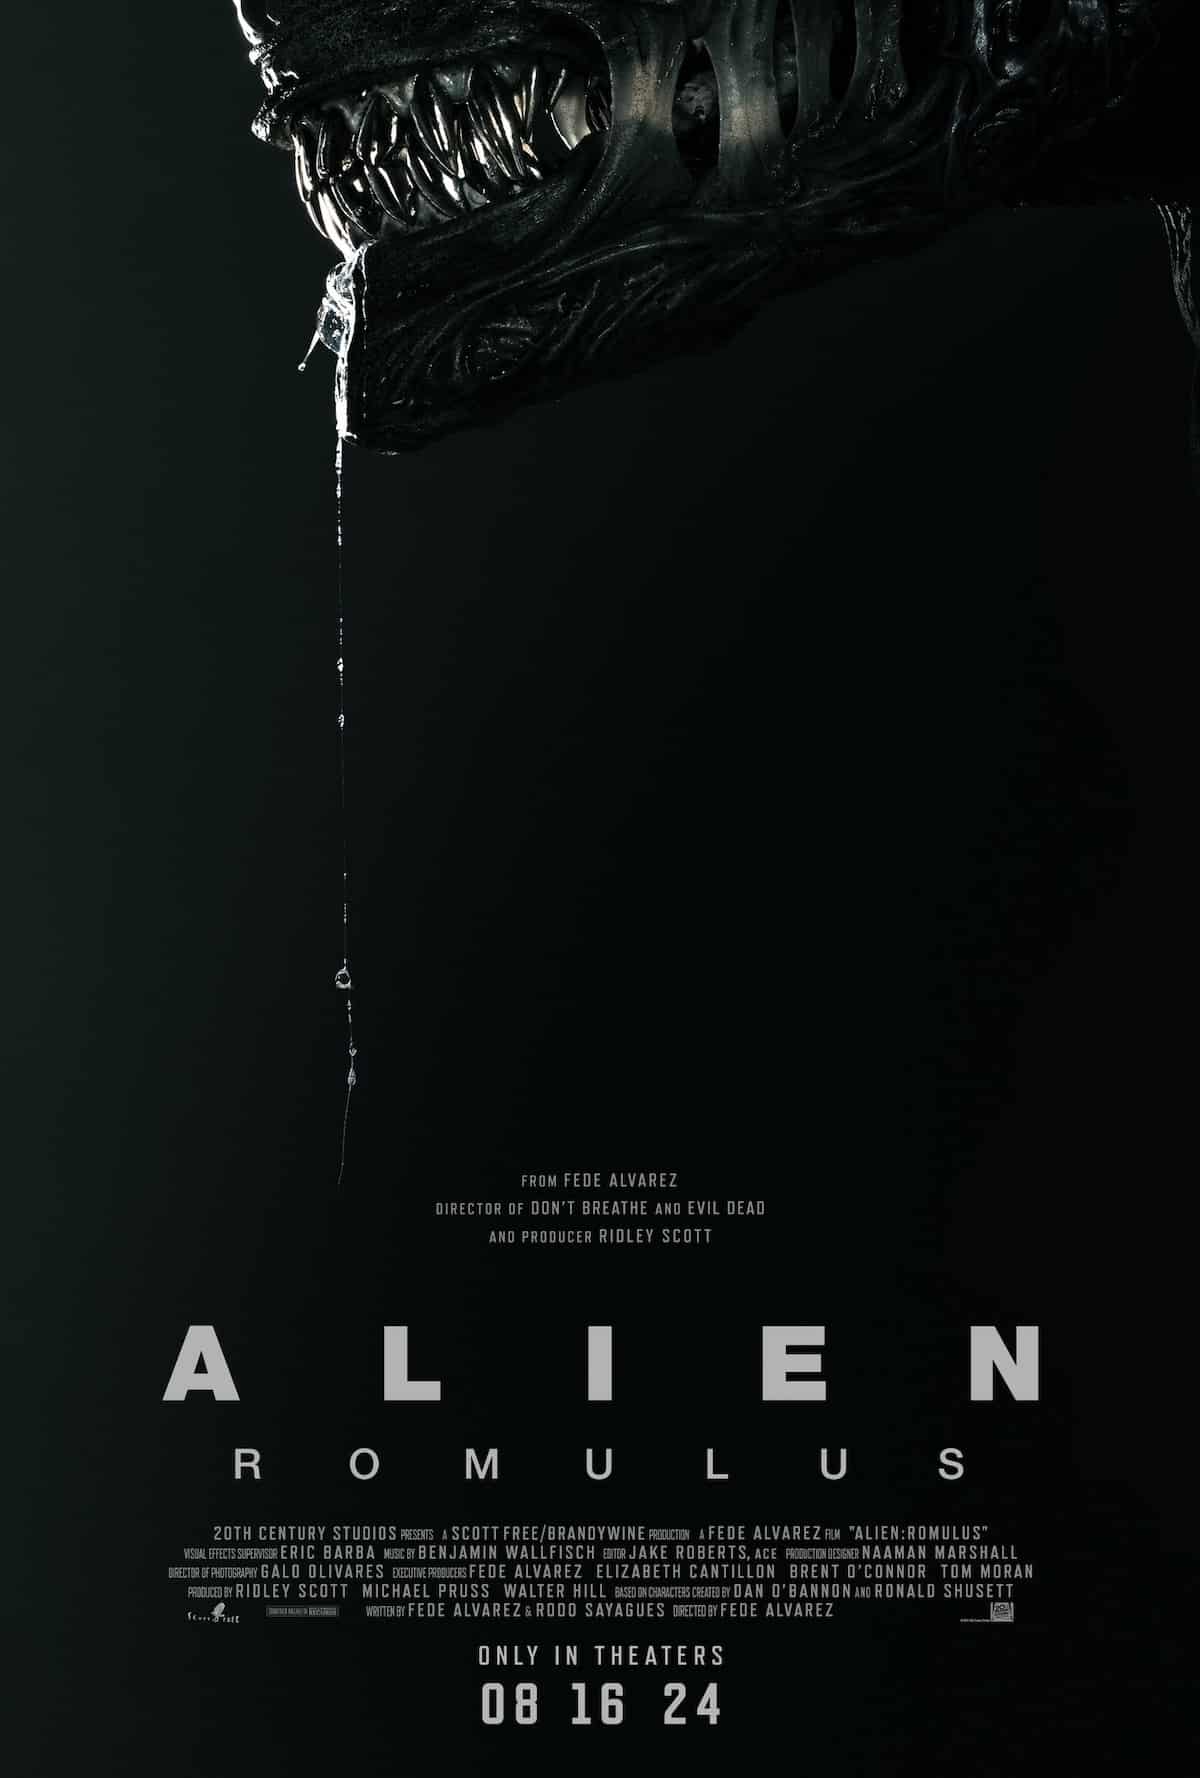 Poster for Alien: Romulus. It's mostly black except for the bottom jaw of a Xenomorph.